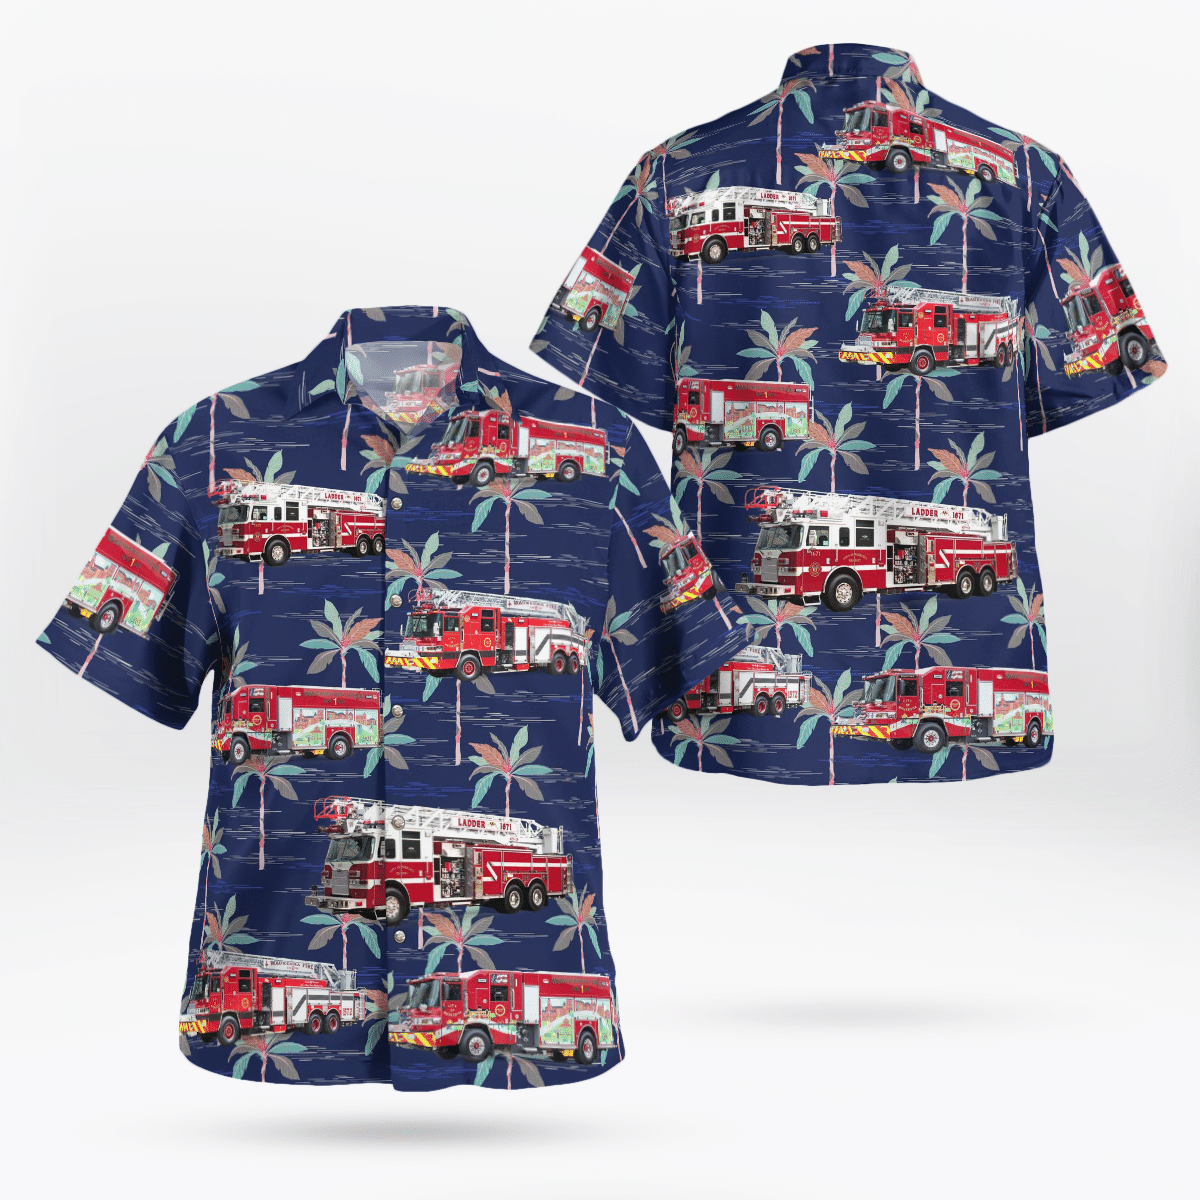 If you are in need of a new summertime look, pick up this Hawaiian shirt 61